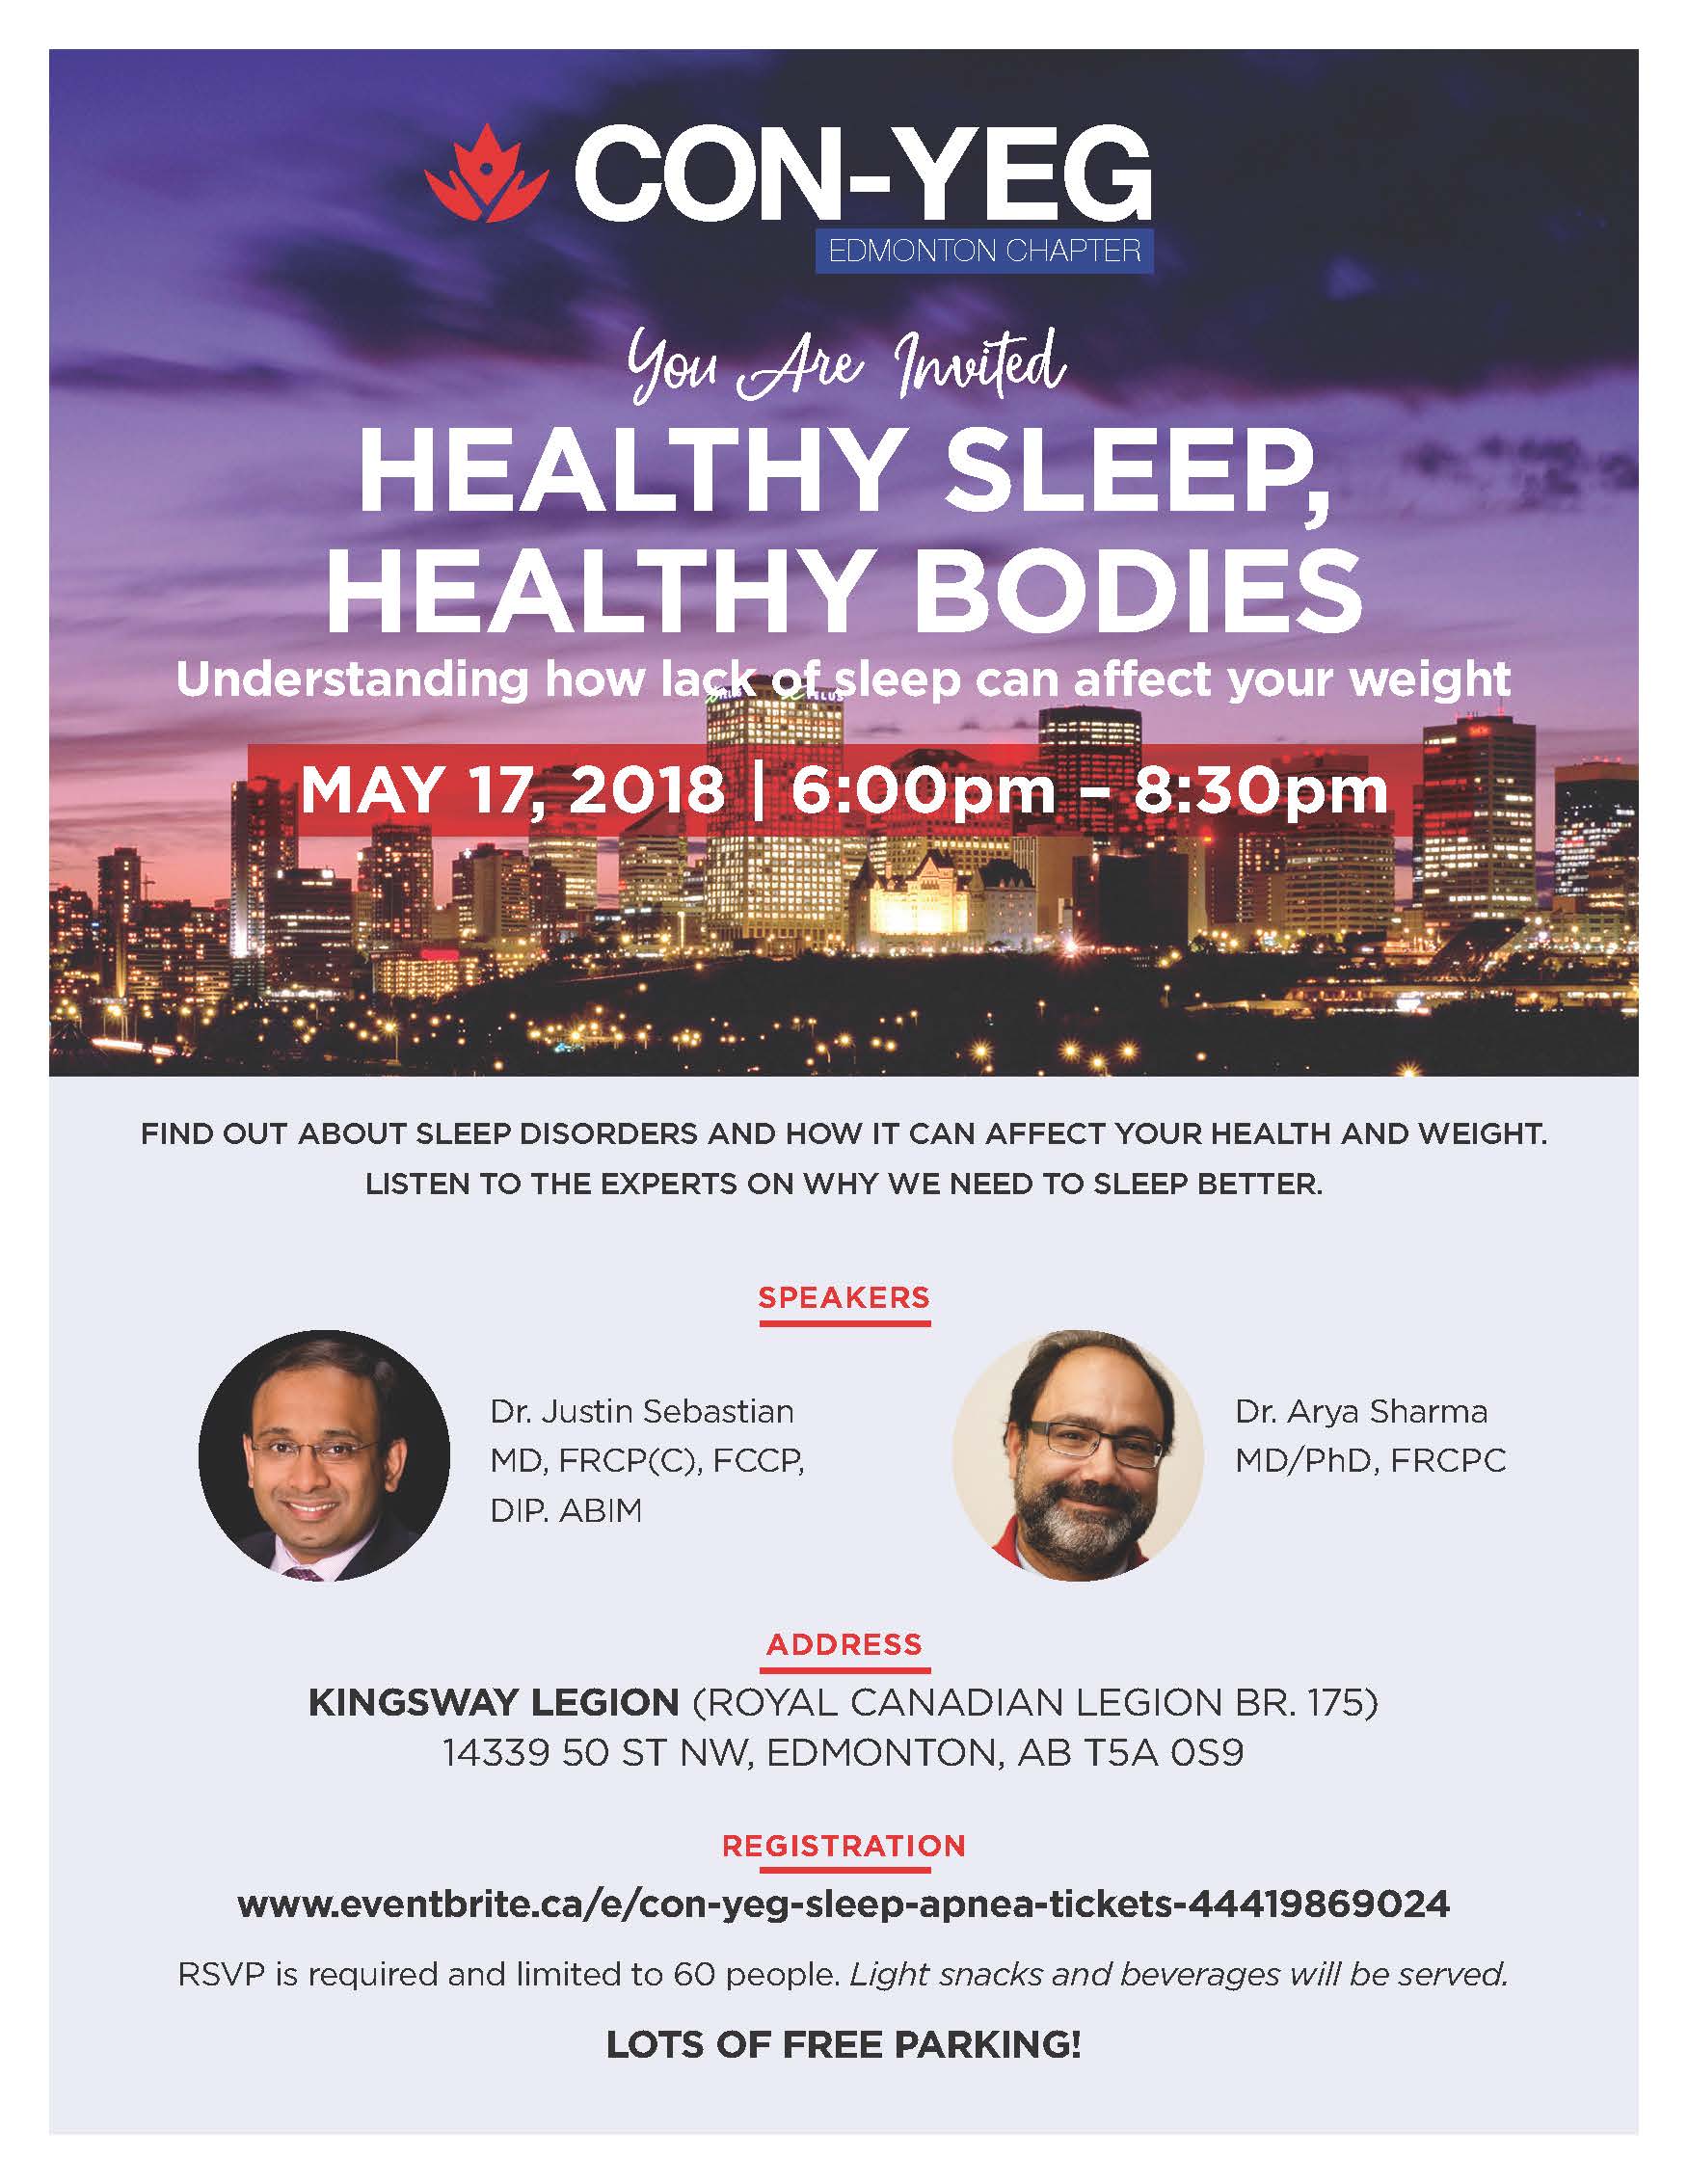 Promotional flyer for a "healthy bodies, healthy sleep" event on may 17, 2018, featuring speakers dr. justin spears and dr. aya sharma, with registration details and free parking mention.